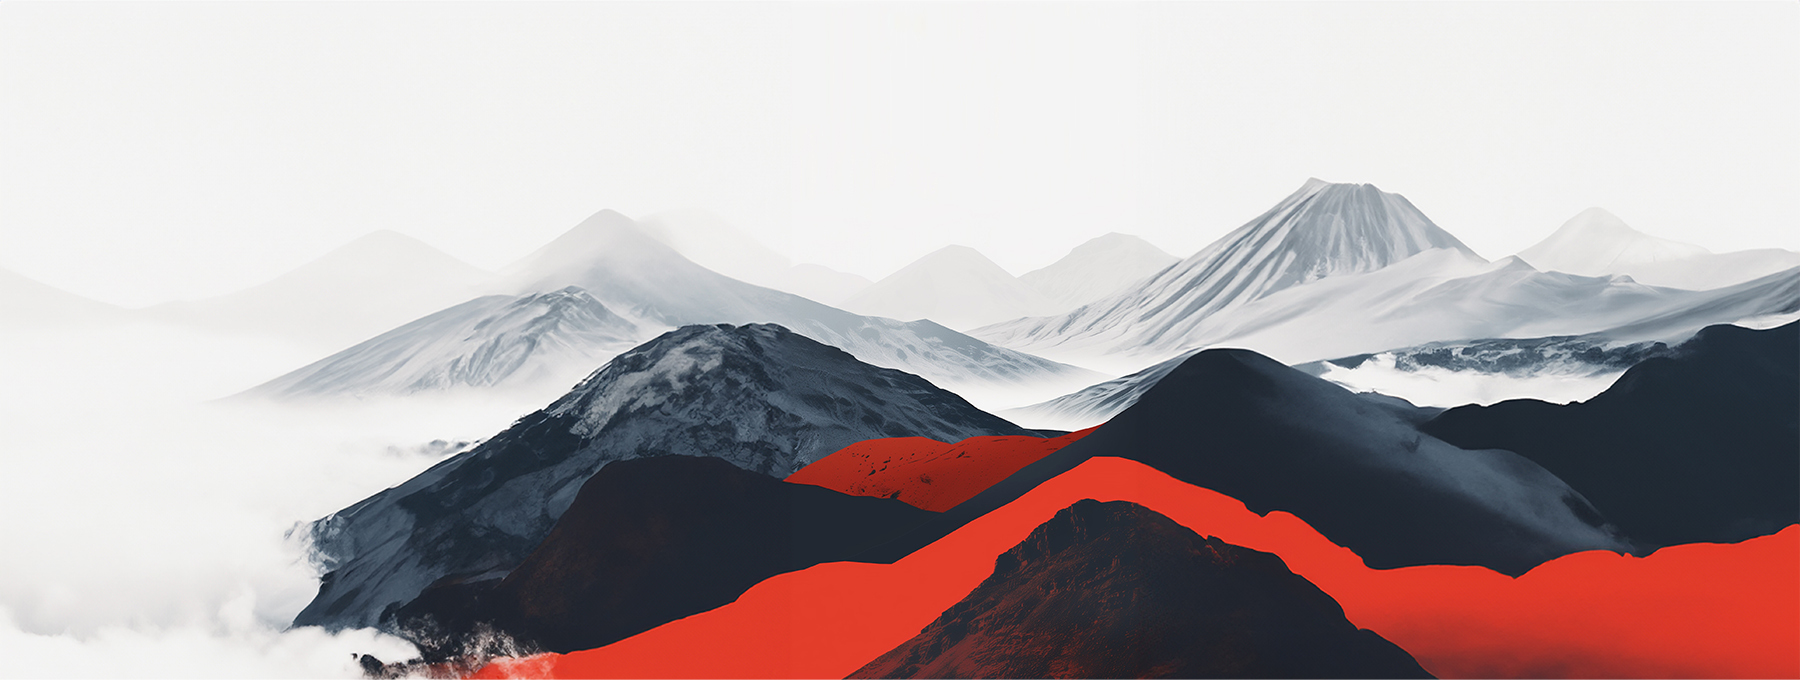 Abstract image of mountains